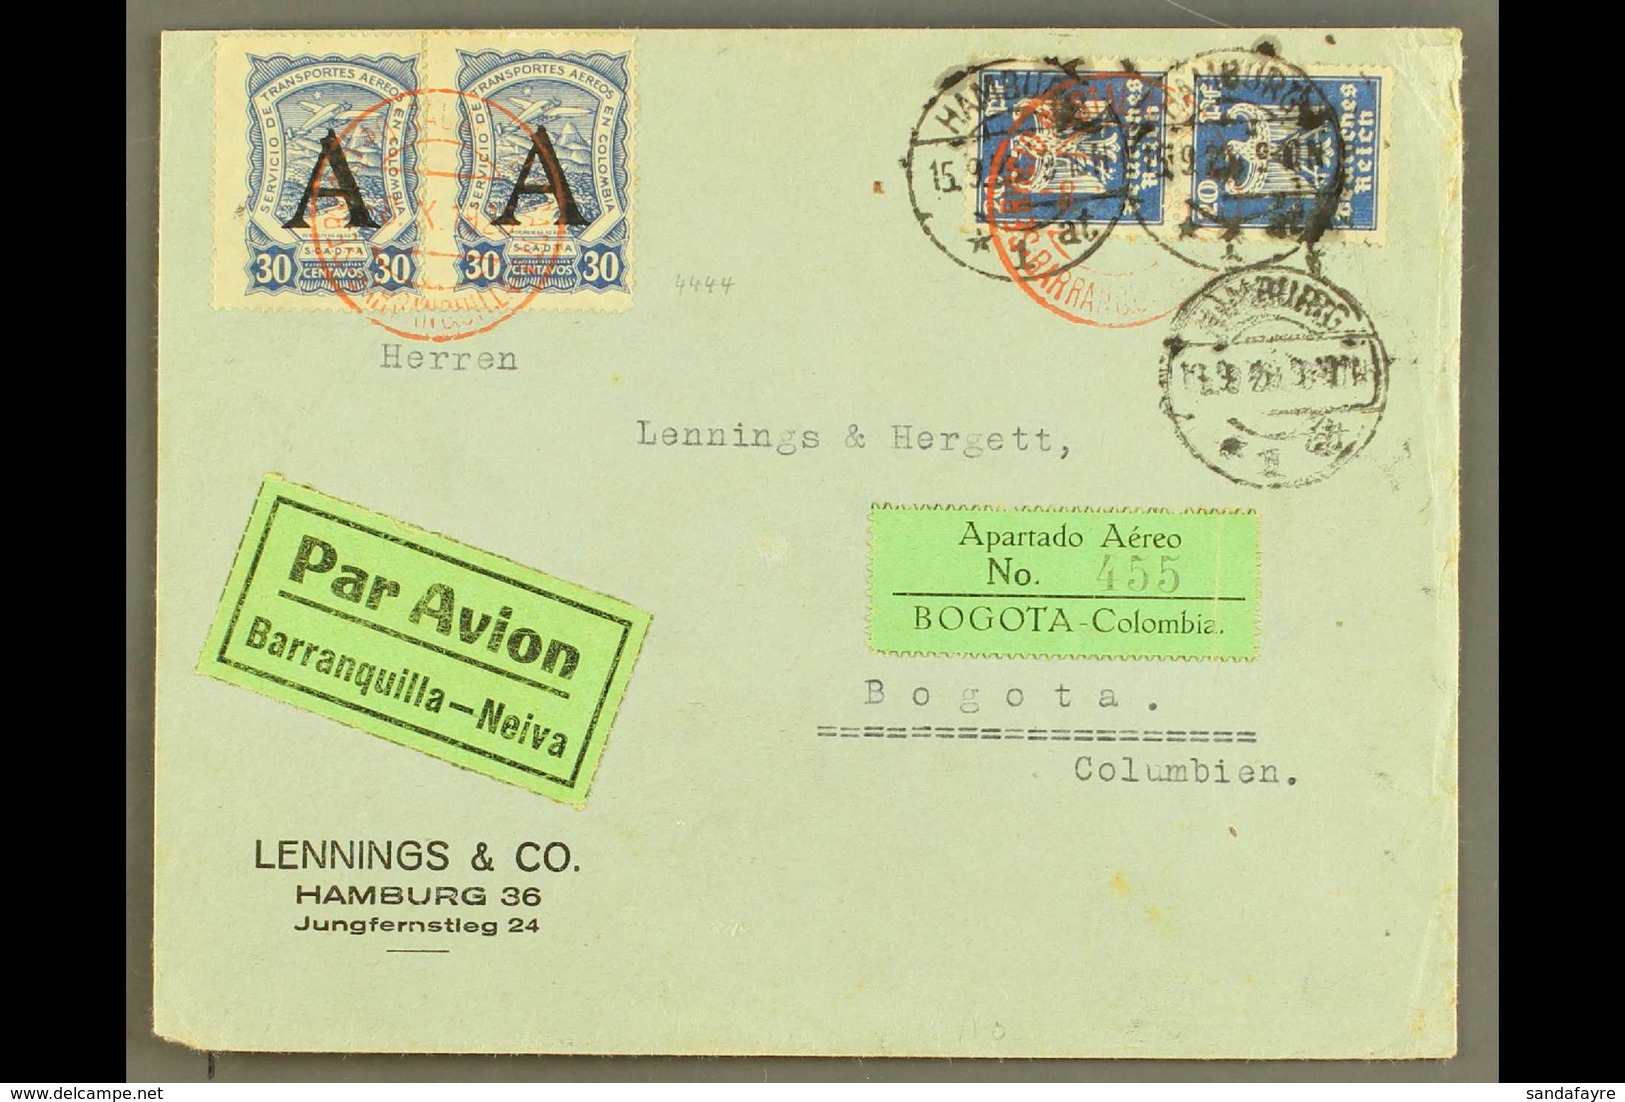 SCADTA  1925 (15 Sep) Cover From Germany Addressed To Bogota, Bearing Germany 20pf Pair Tied By "Hamburg" Cds's And SCAD - Colombia